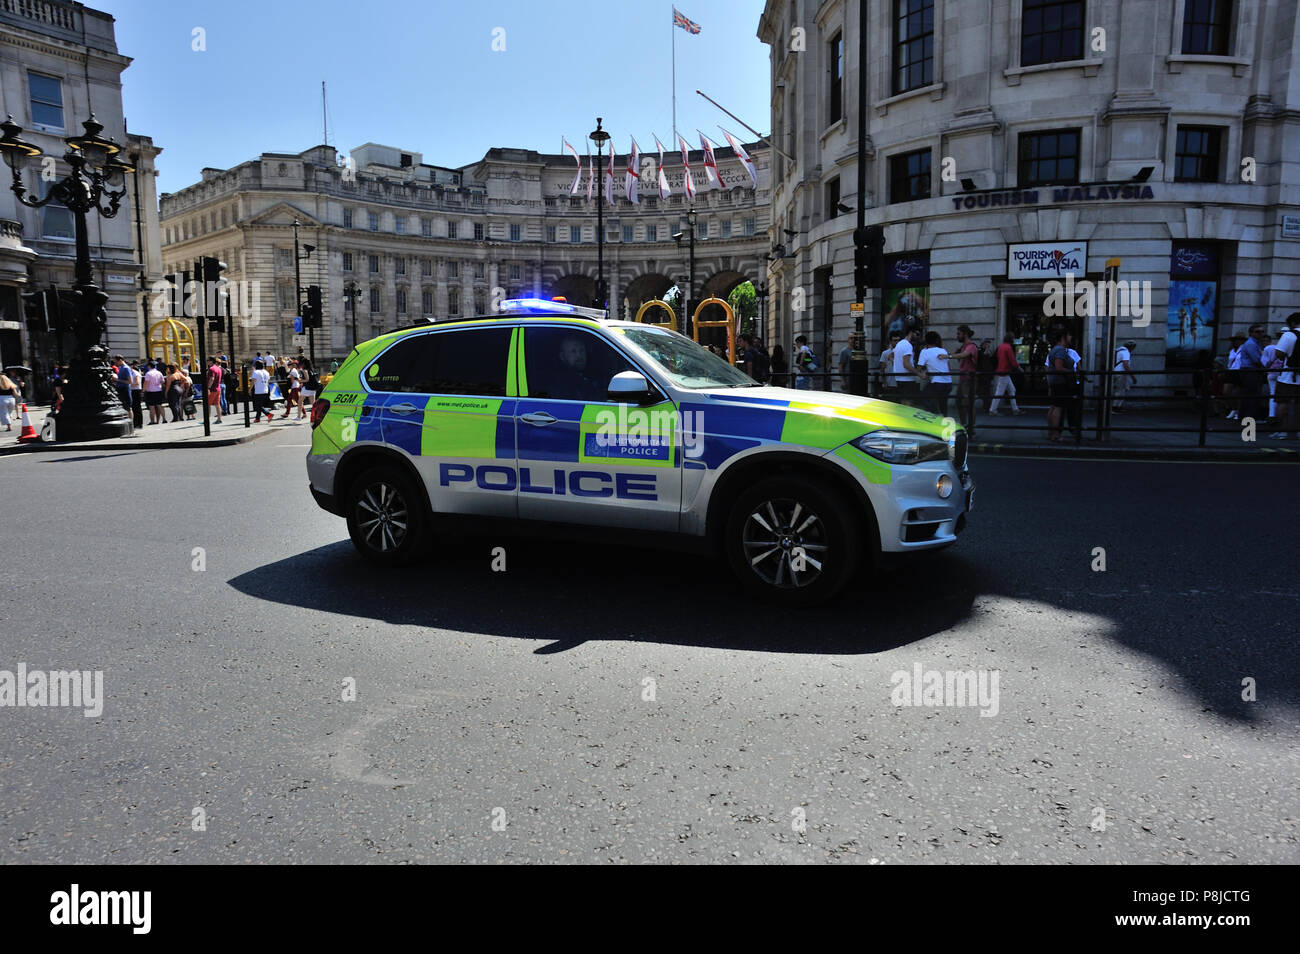 Police SUV car attending emergency with blue lights flashing, London, England, UK Stock Photo